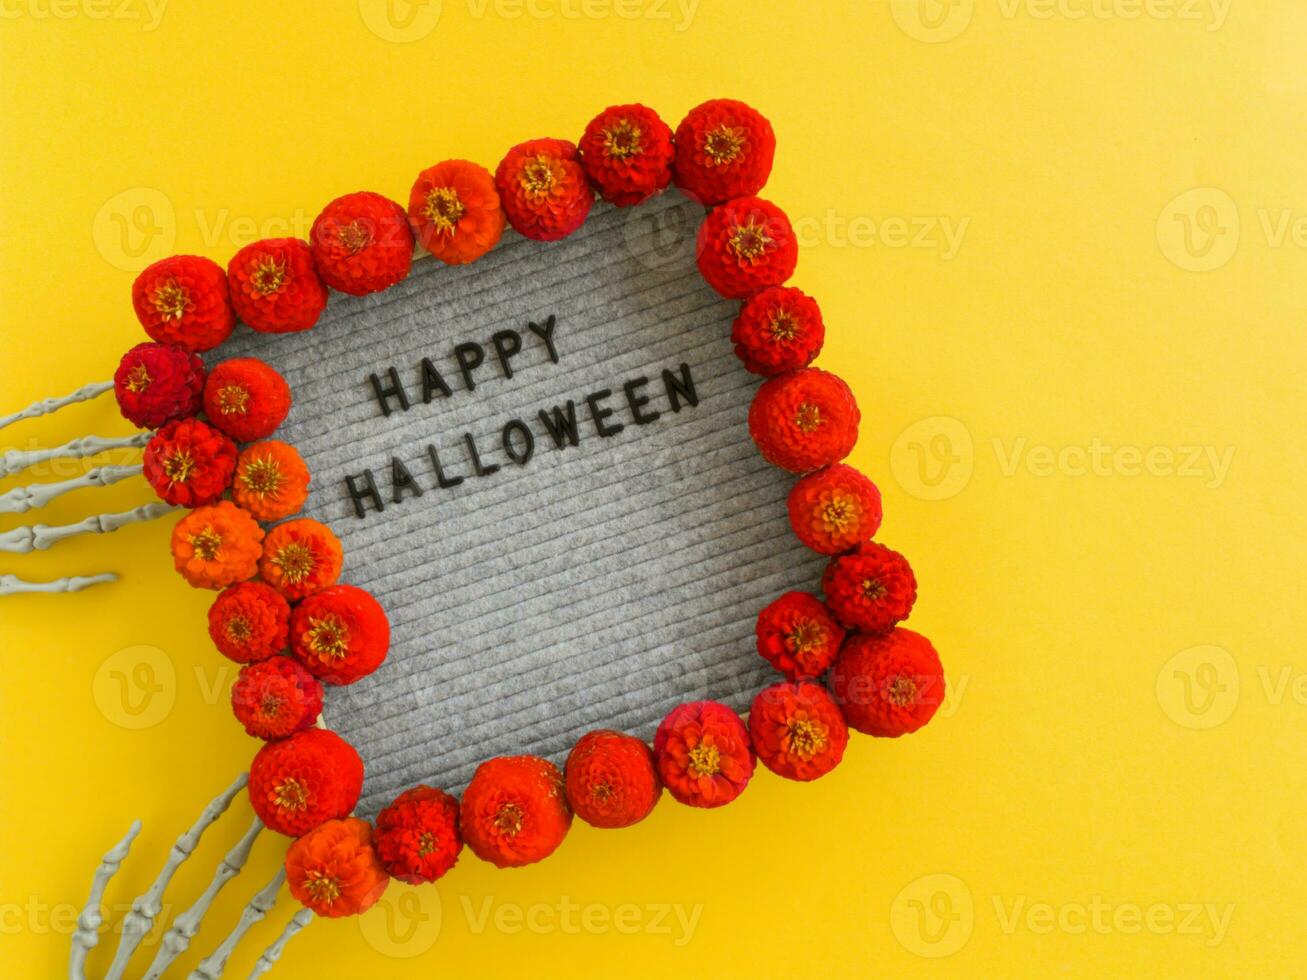 In a frame with red flowers, the inscription is laid out happy Halloween. photo